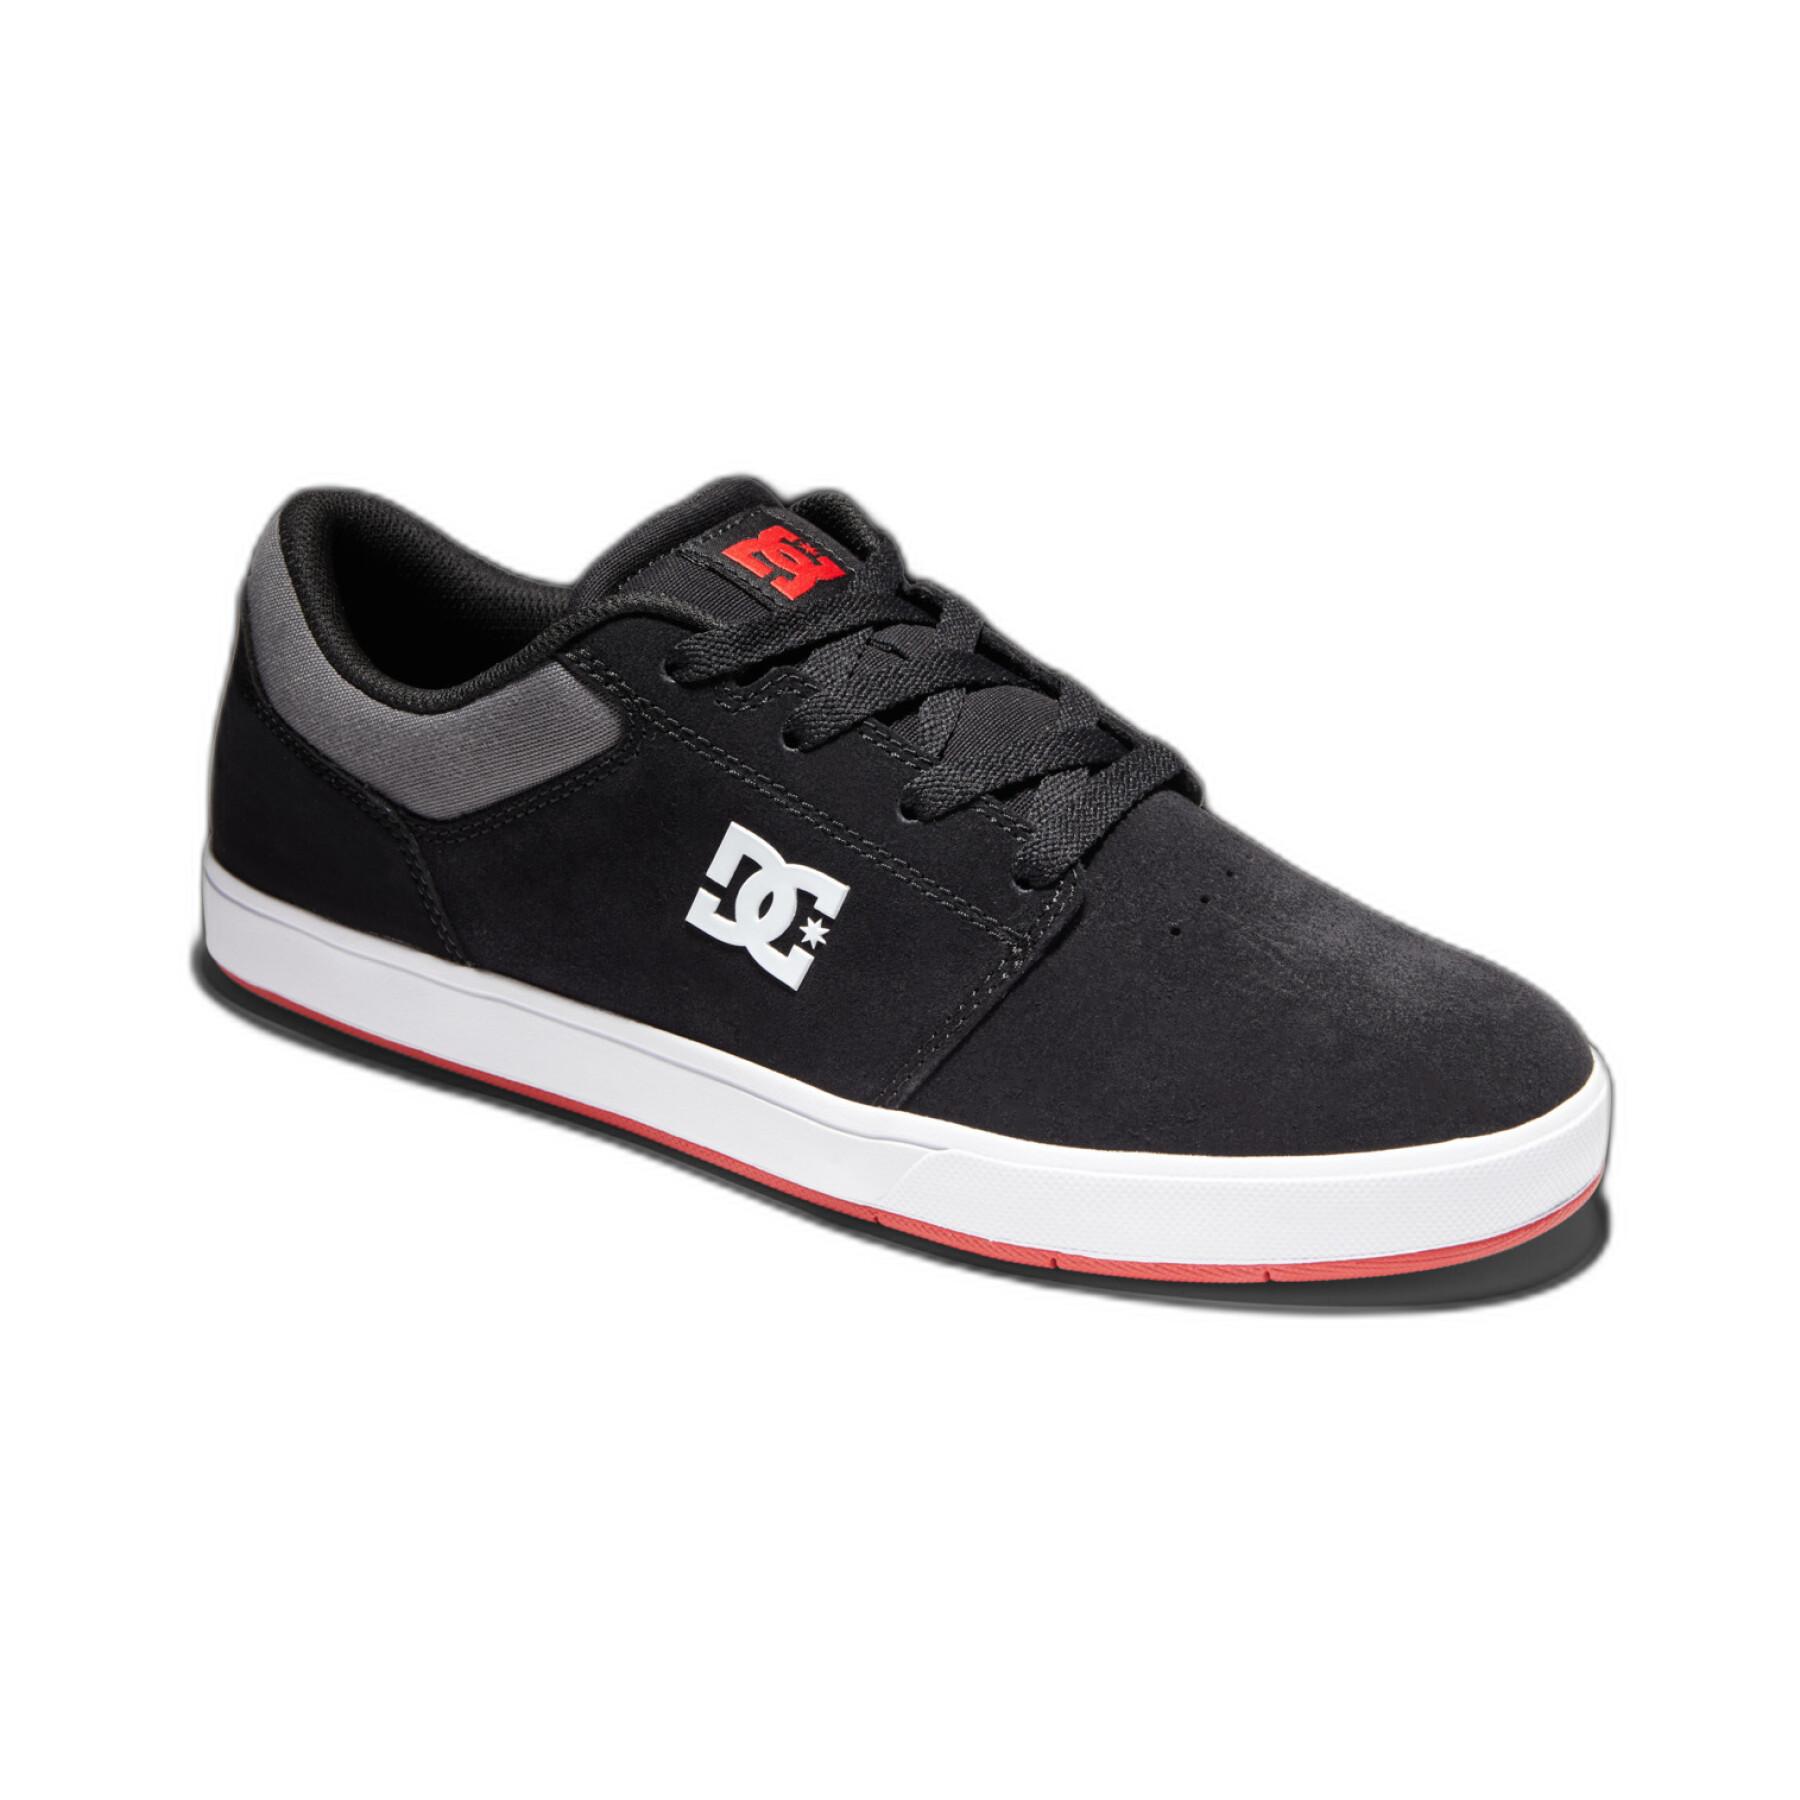 Sneakers DC Shoes Crisis 2